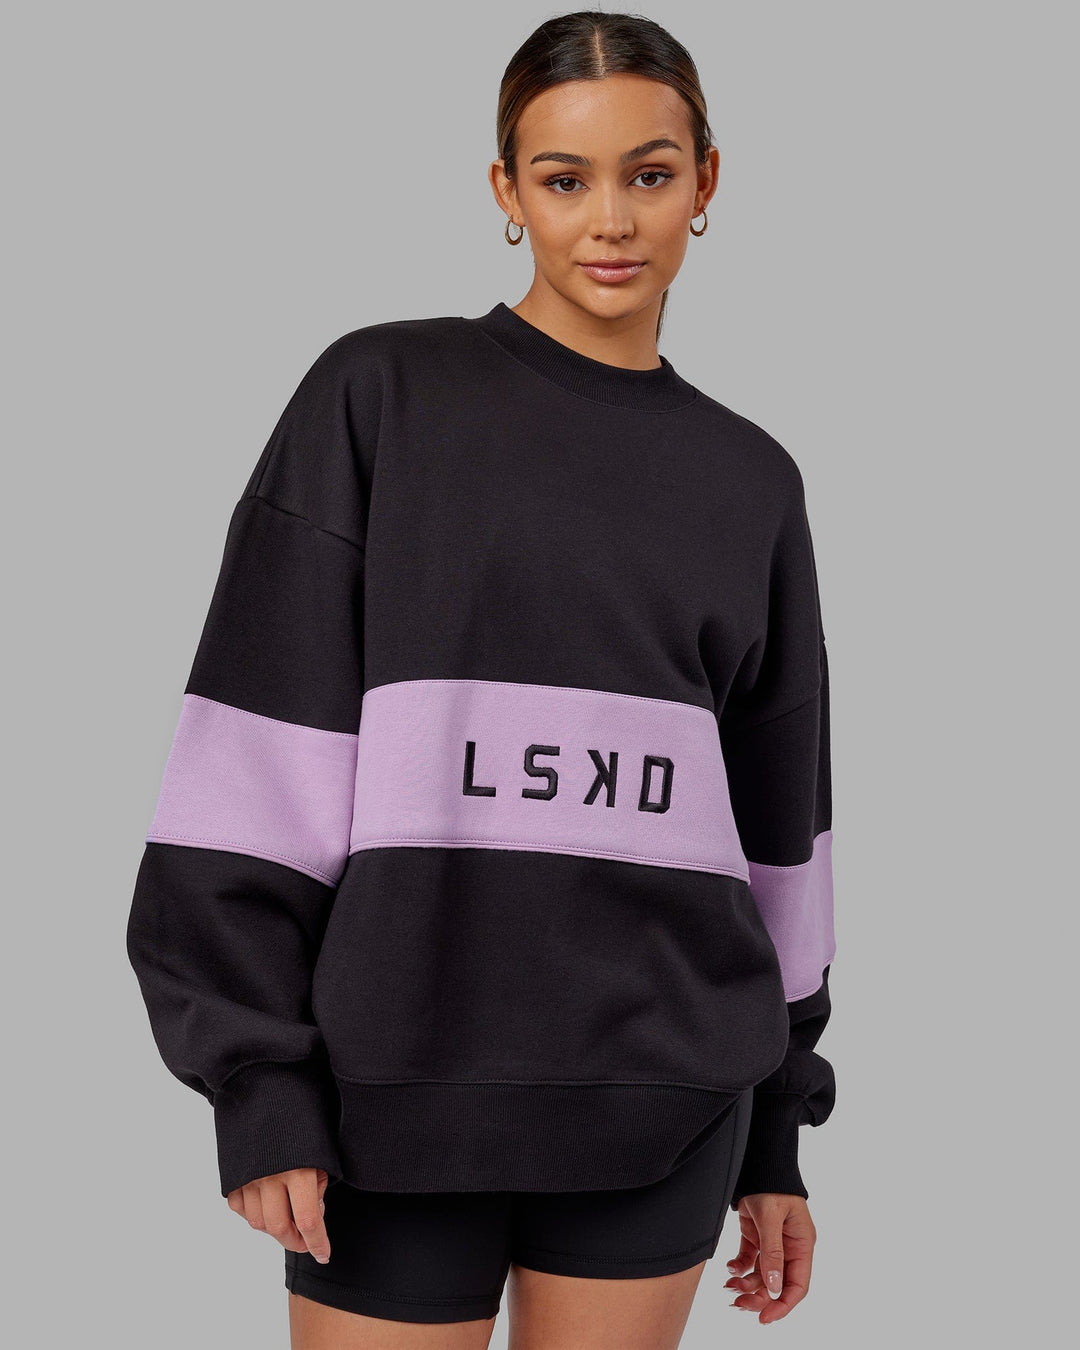 Woman wearing Unisex Extra Time Sweater Oversize - Black-Pale Lilac